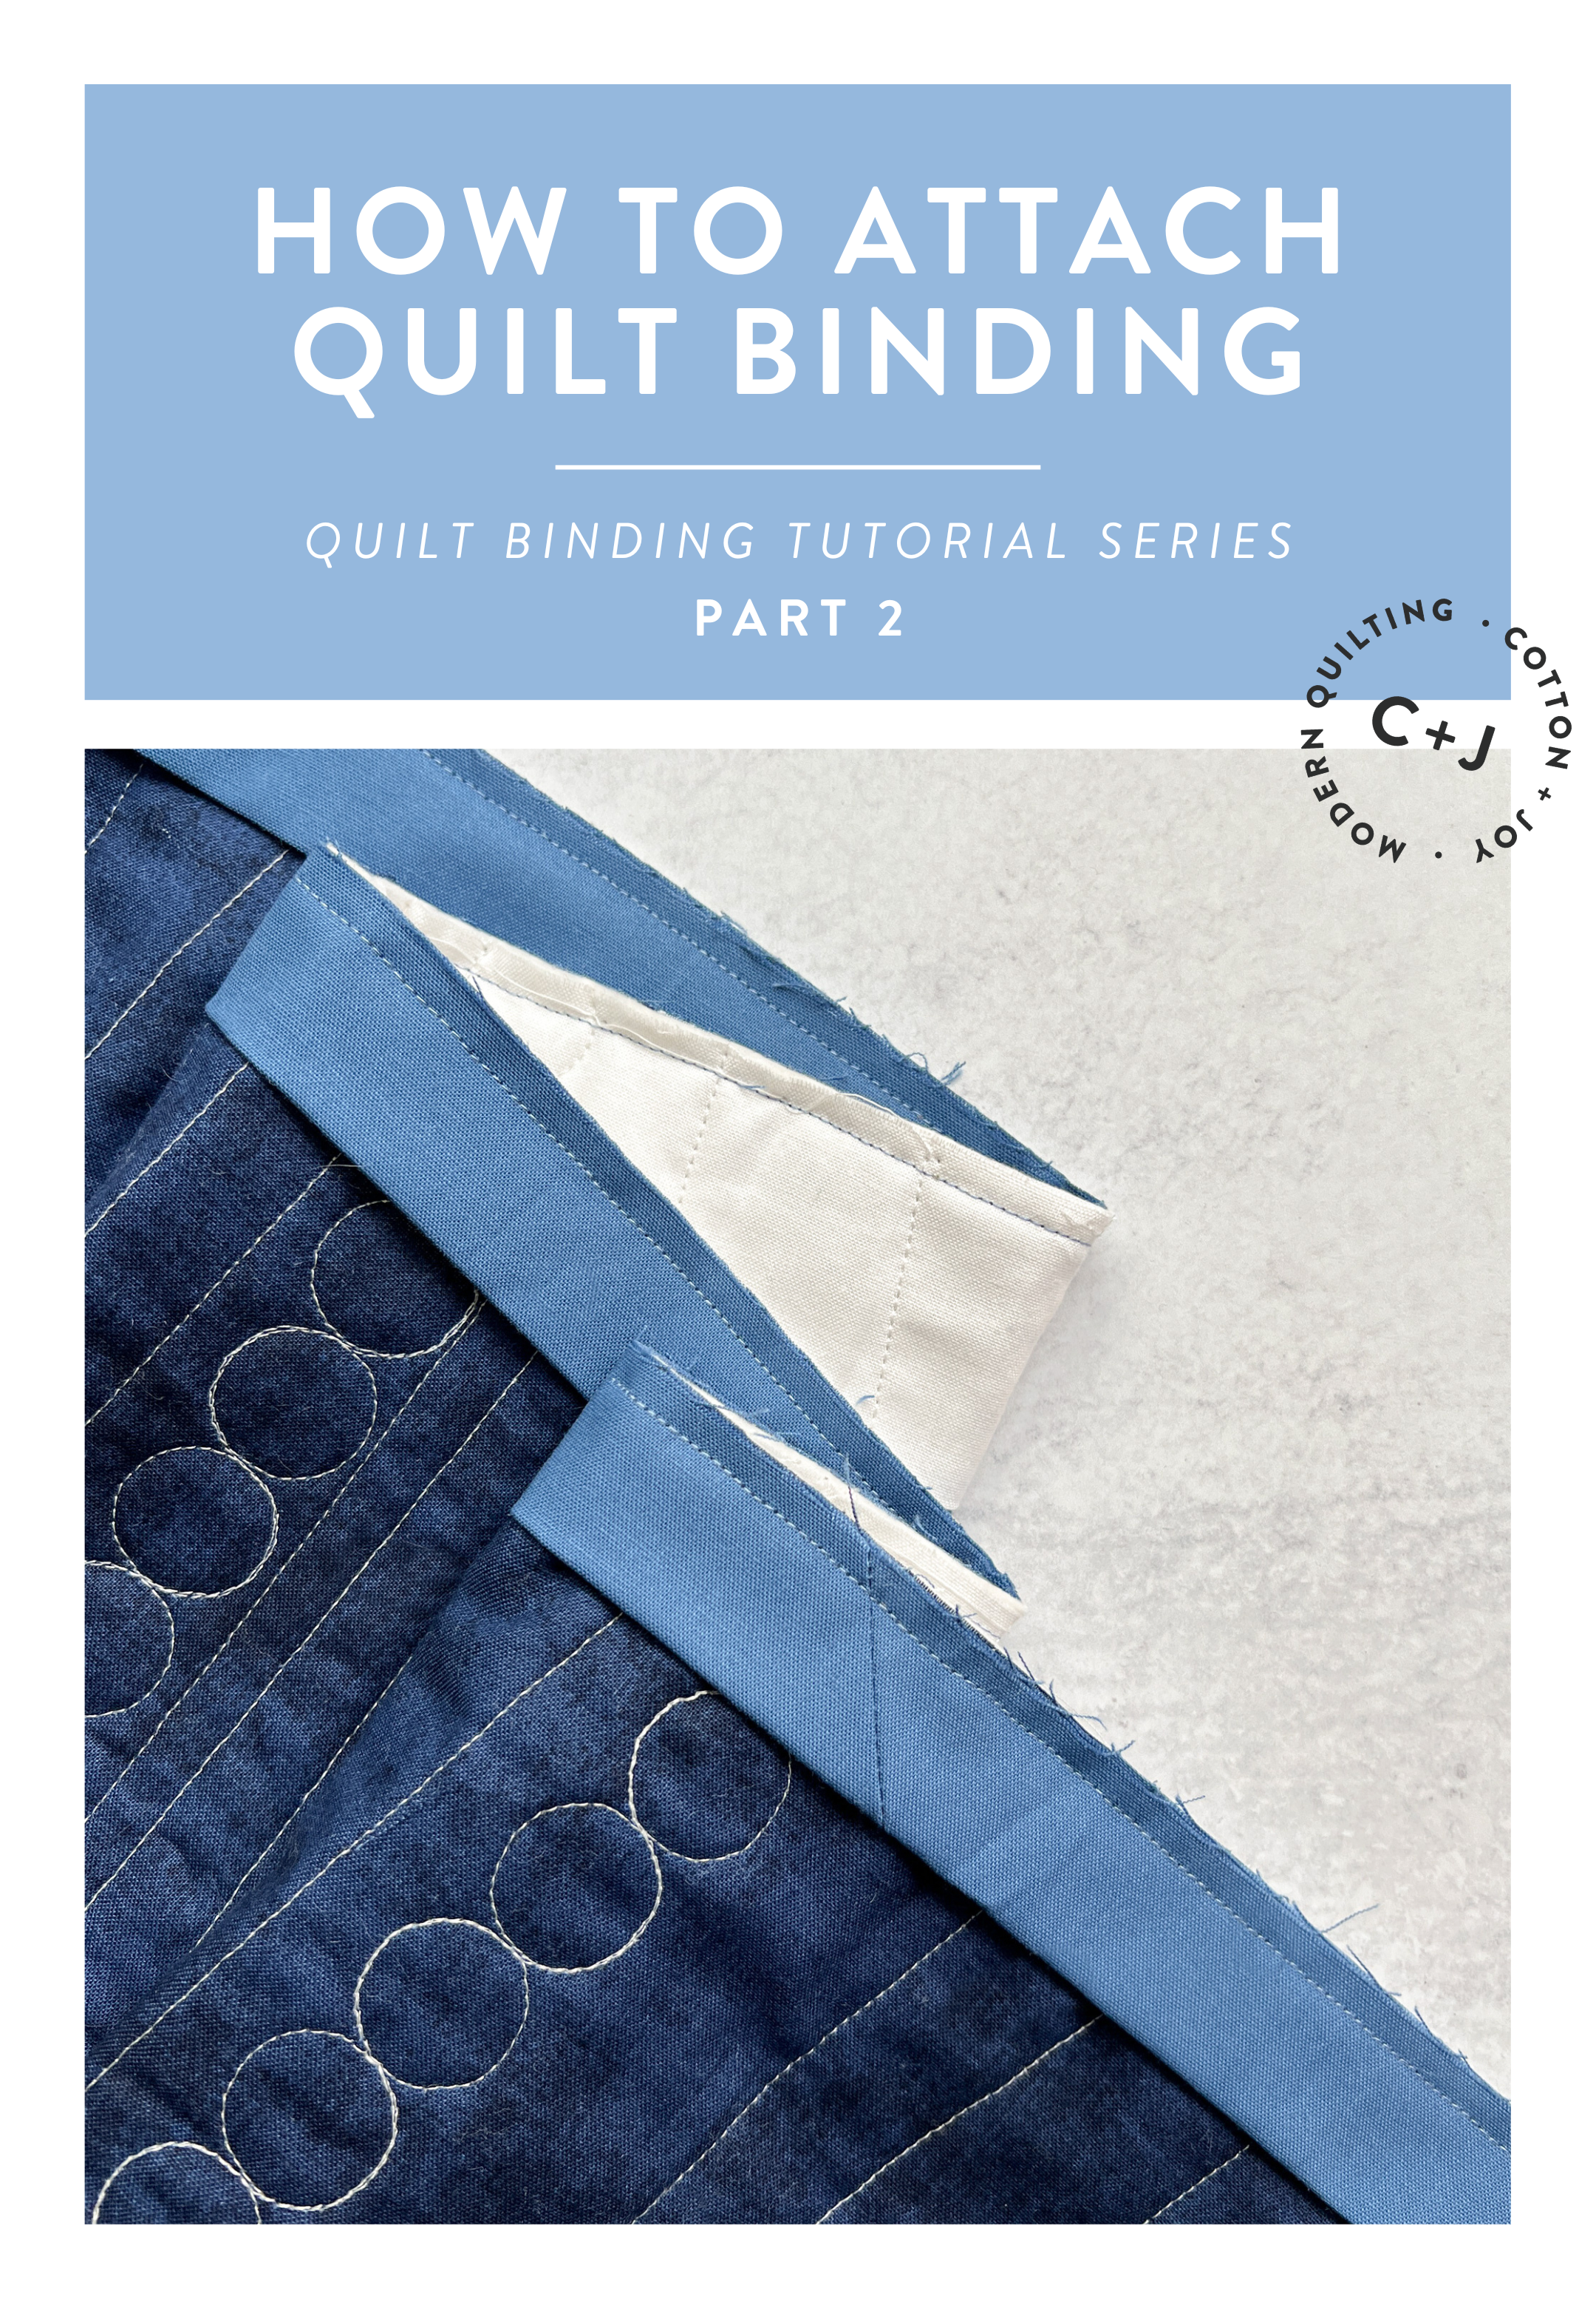 Learn how to sew your binding onto your quilt with this beginner-friendly binding tutorial from Cotton and Joy.